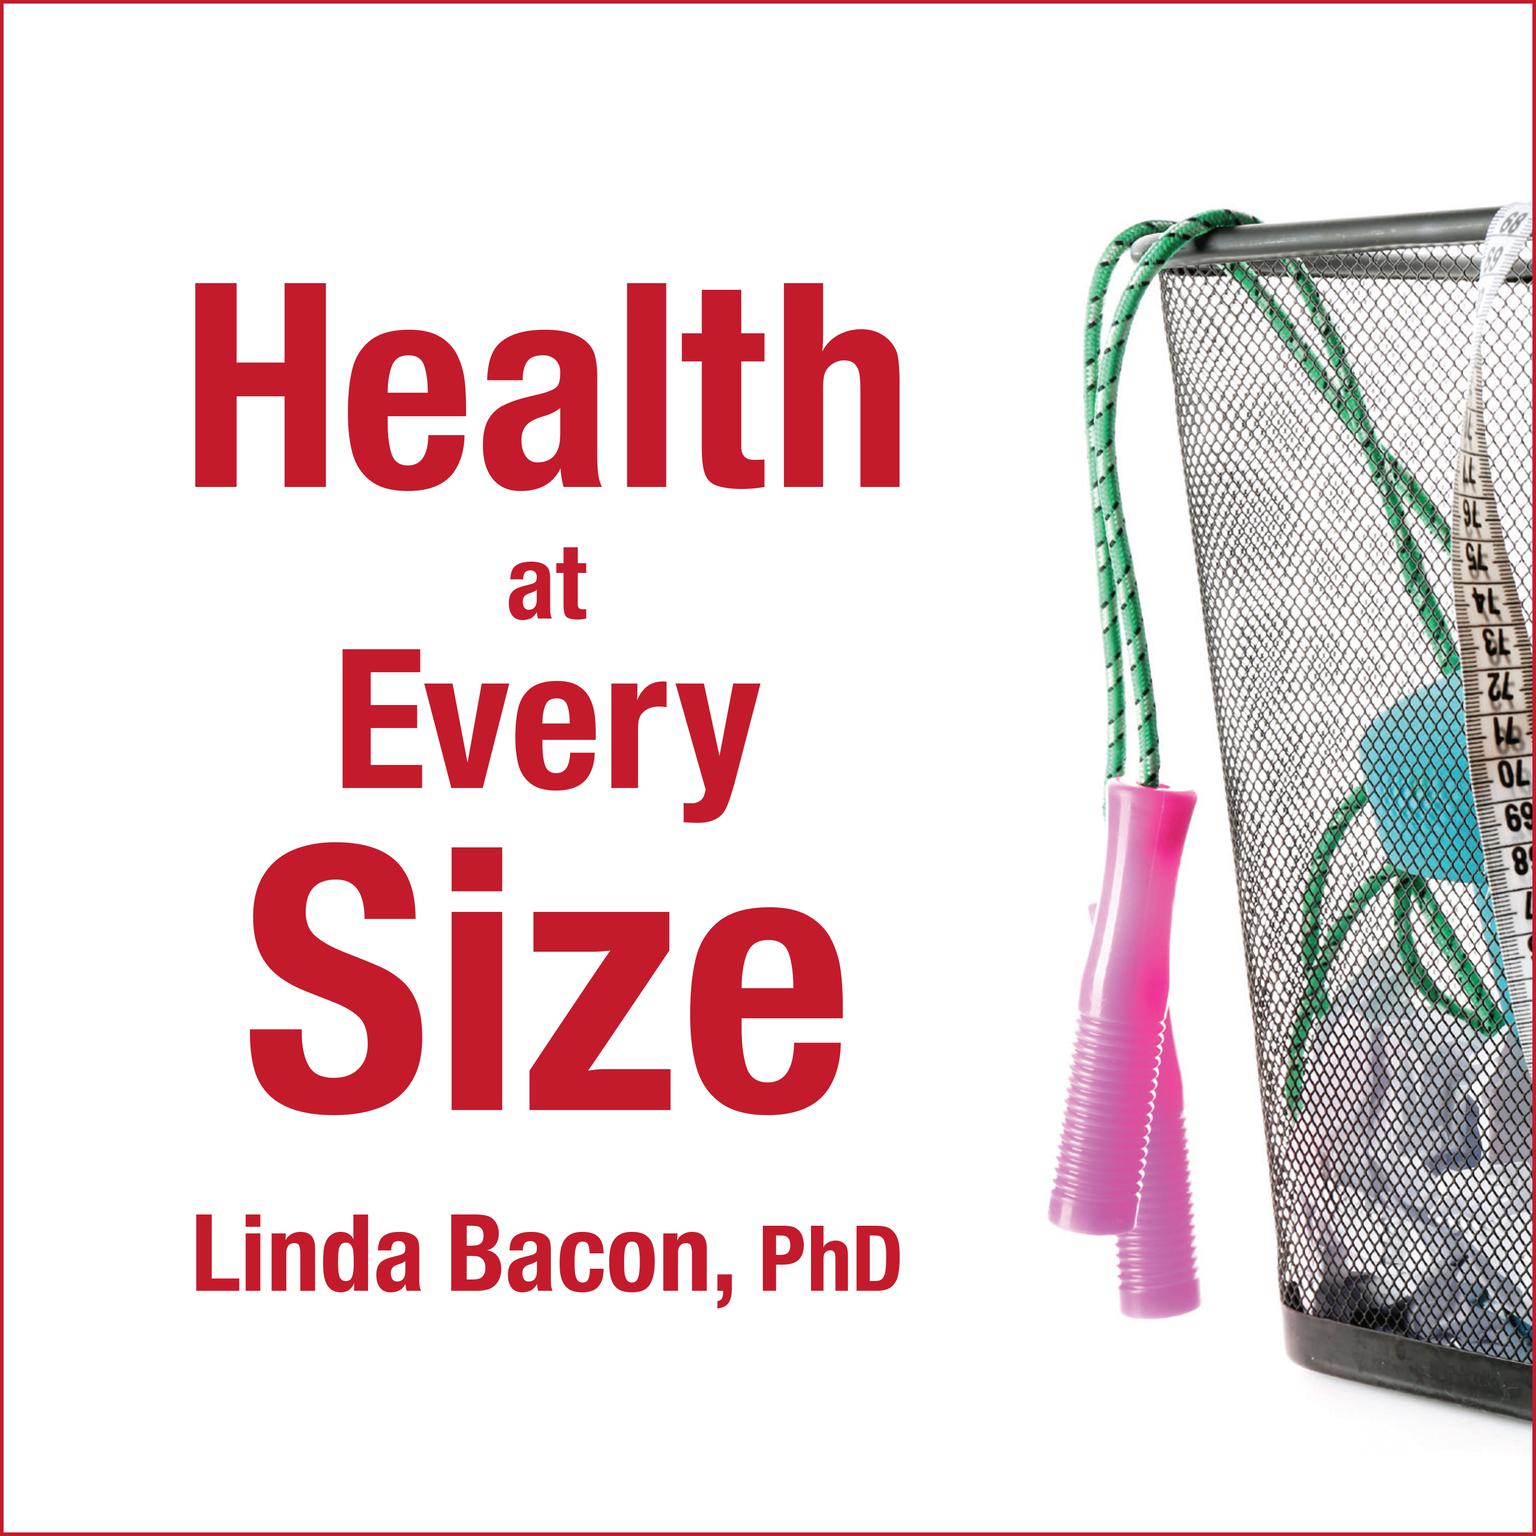 Health At Every Size: The Surprising Truth About Your Weight Audiobook, by Linda Bacon